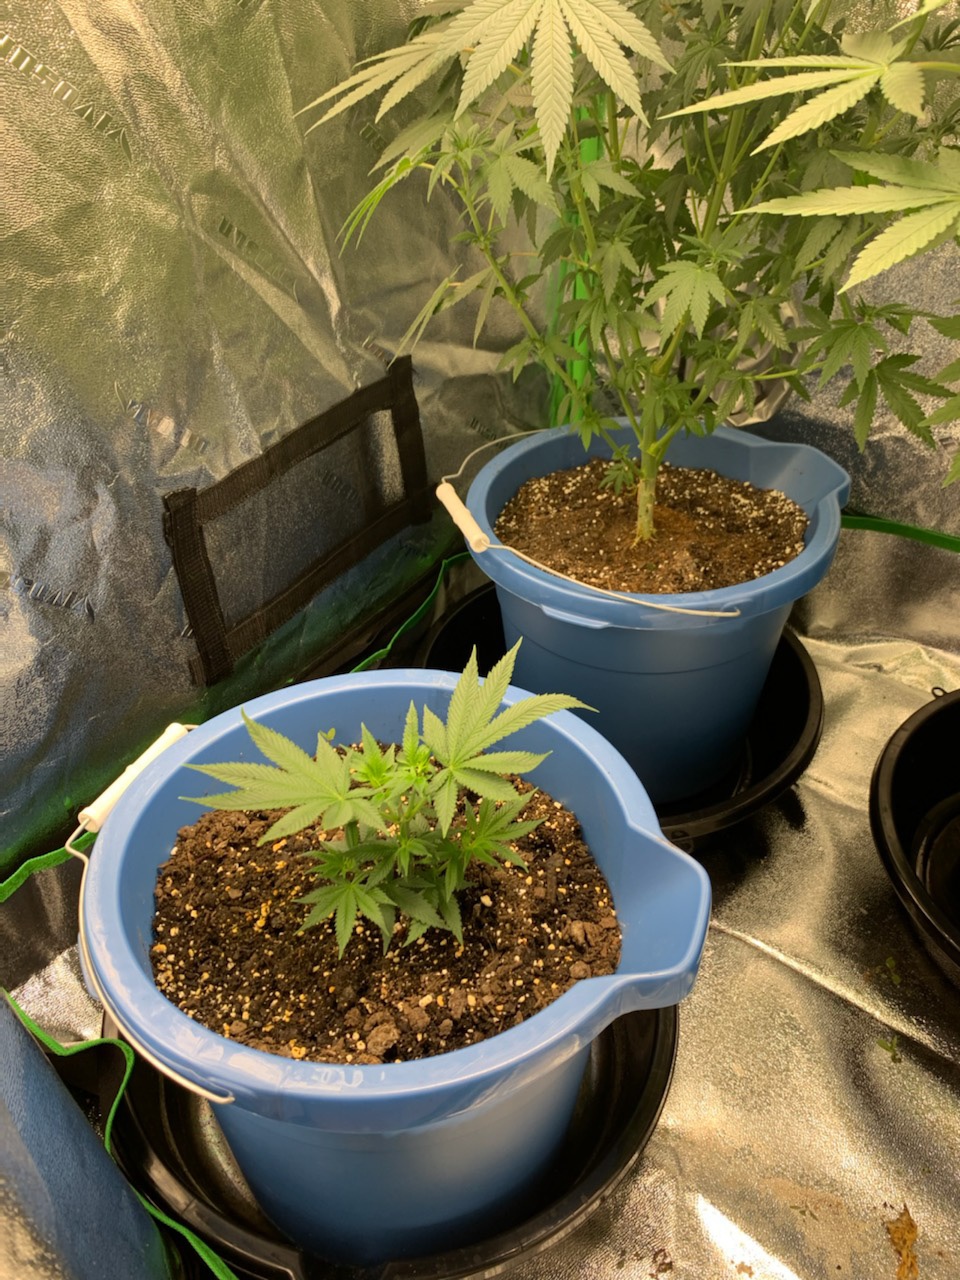 Advice for what to do with my clone